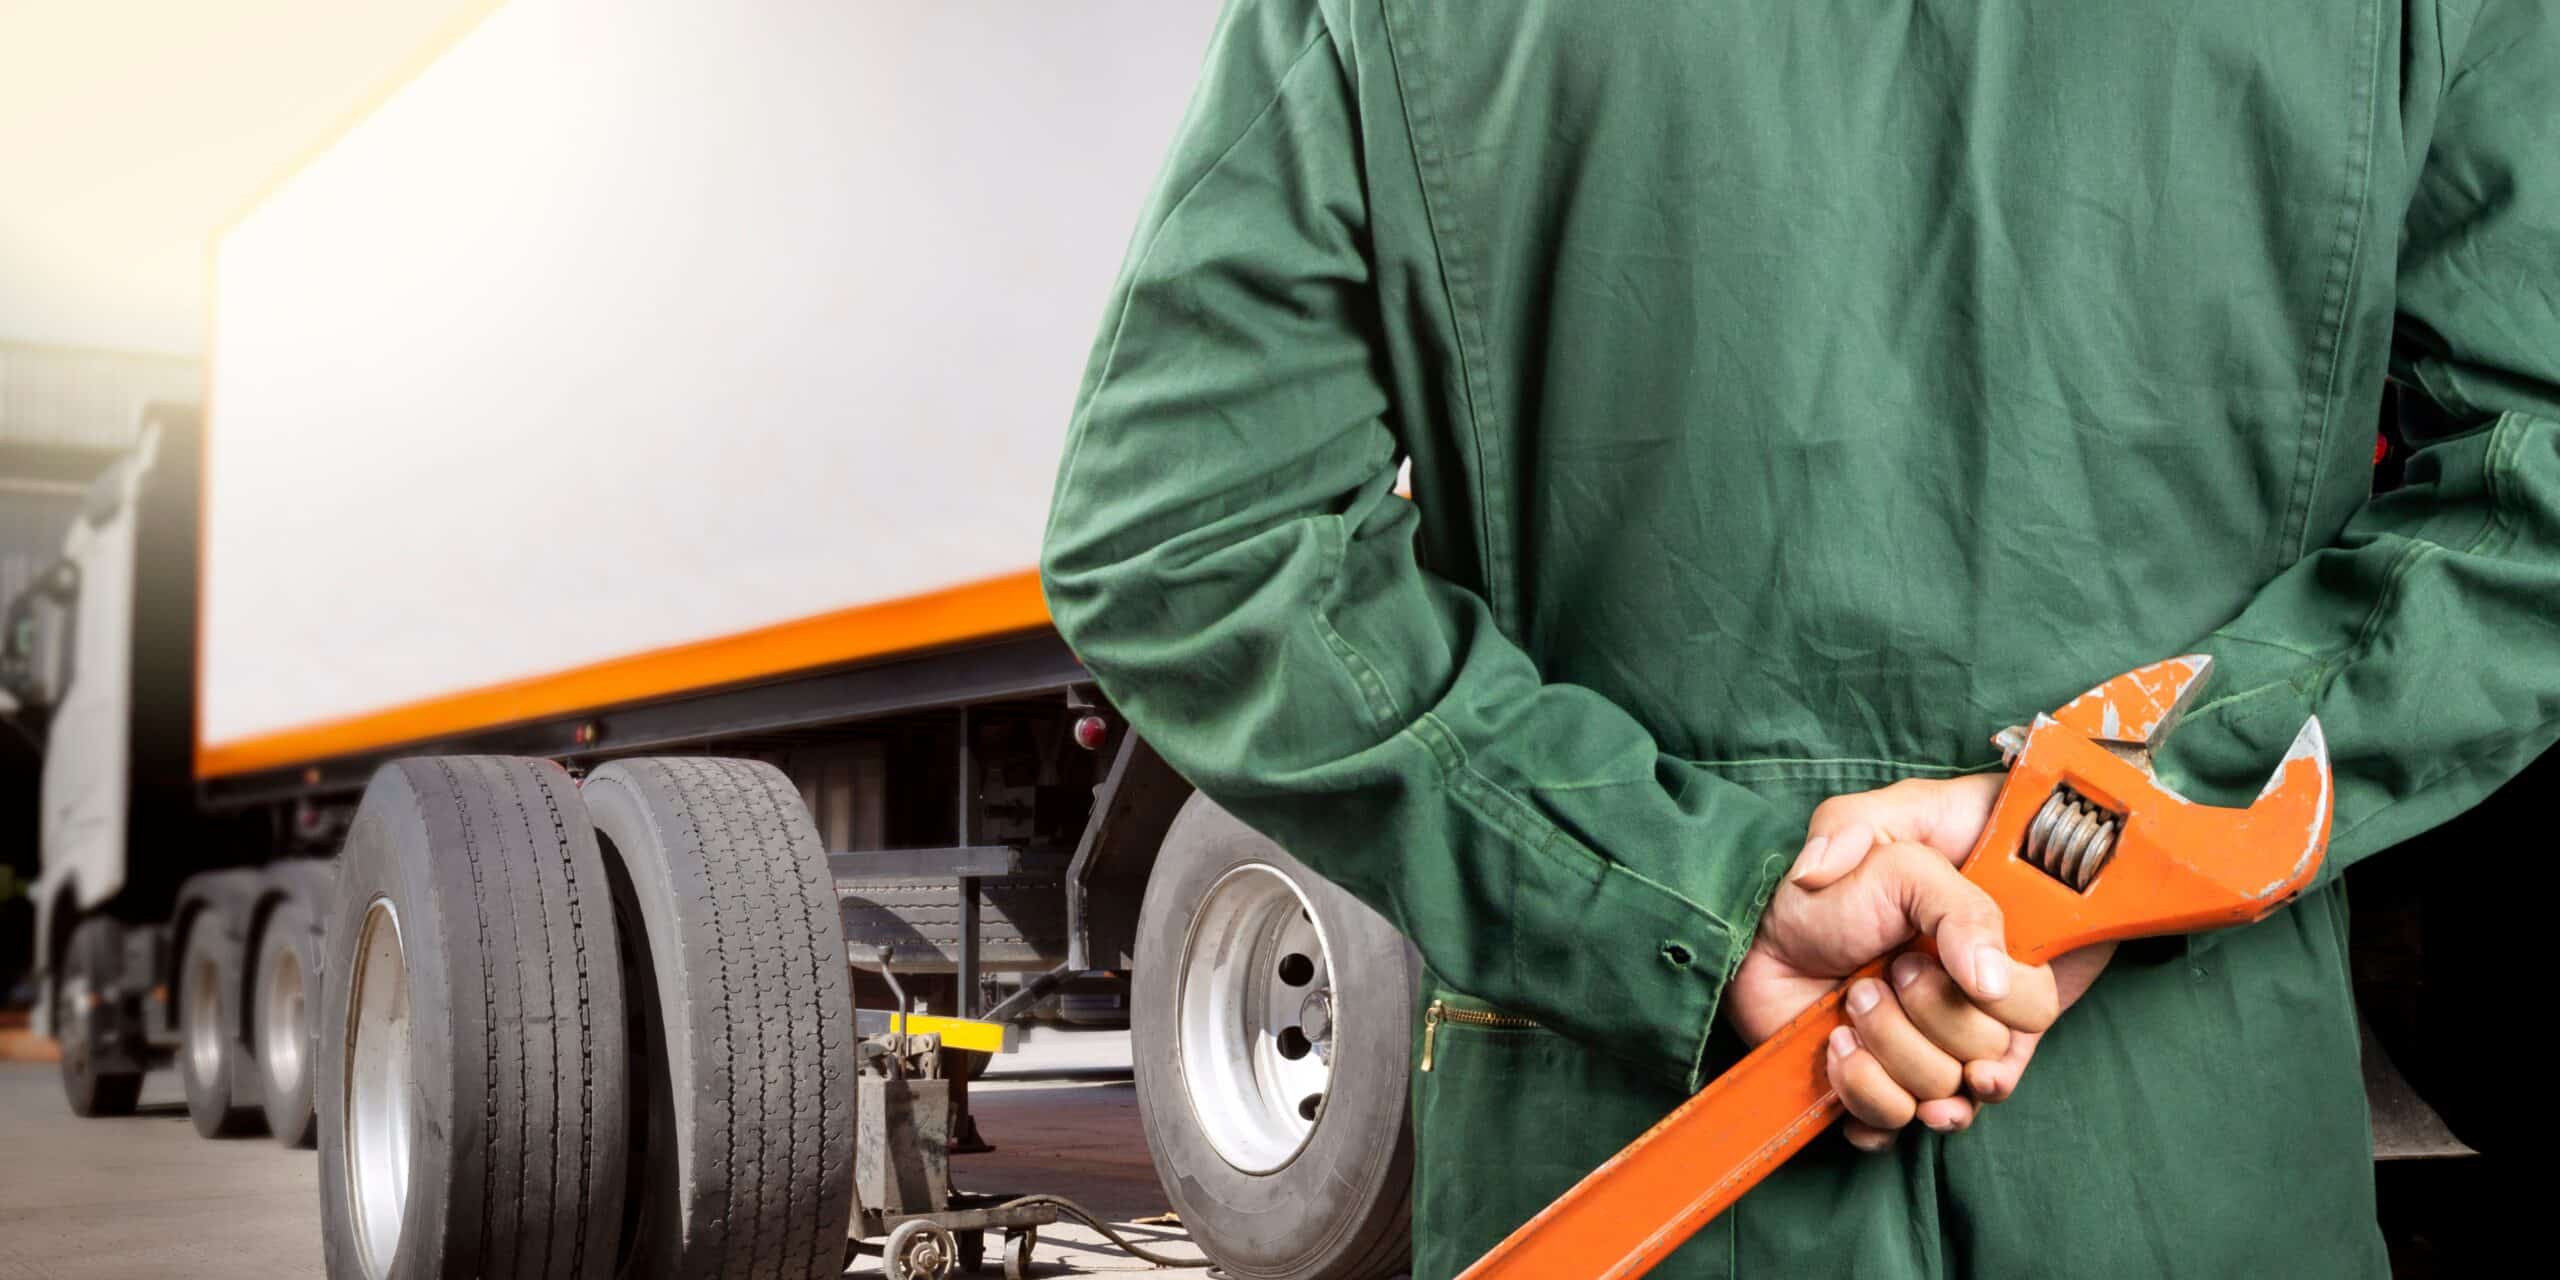  10 best truck driver tools you must have